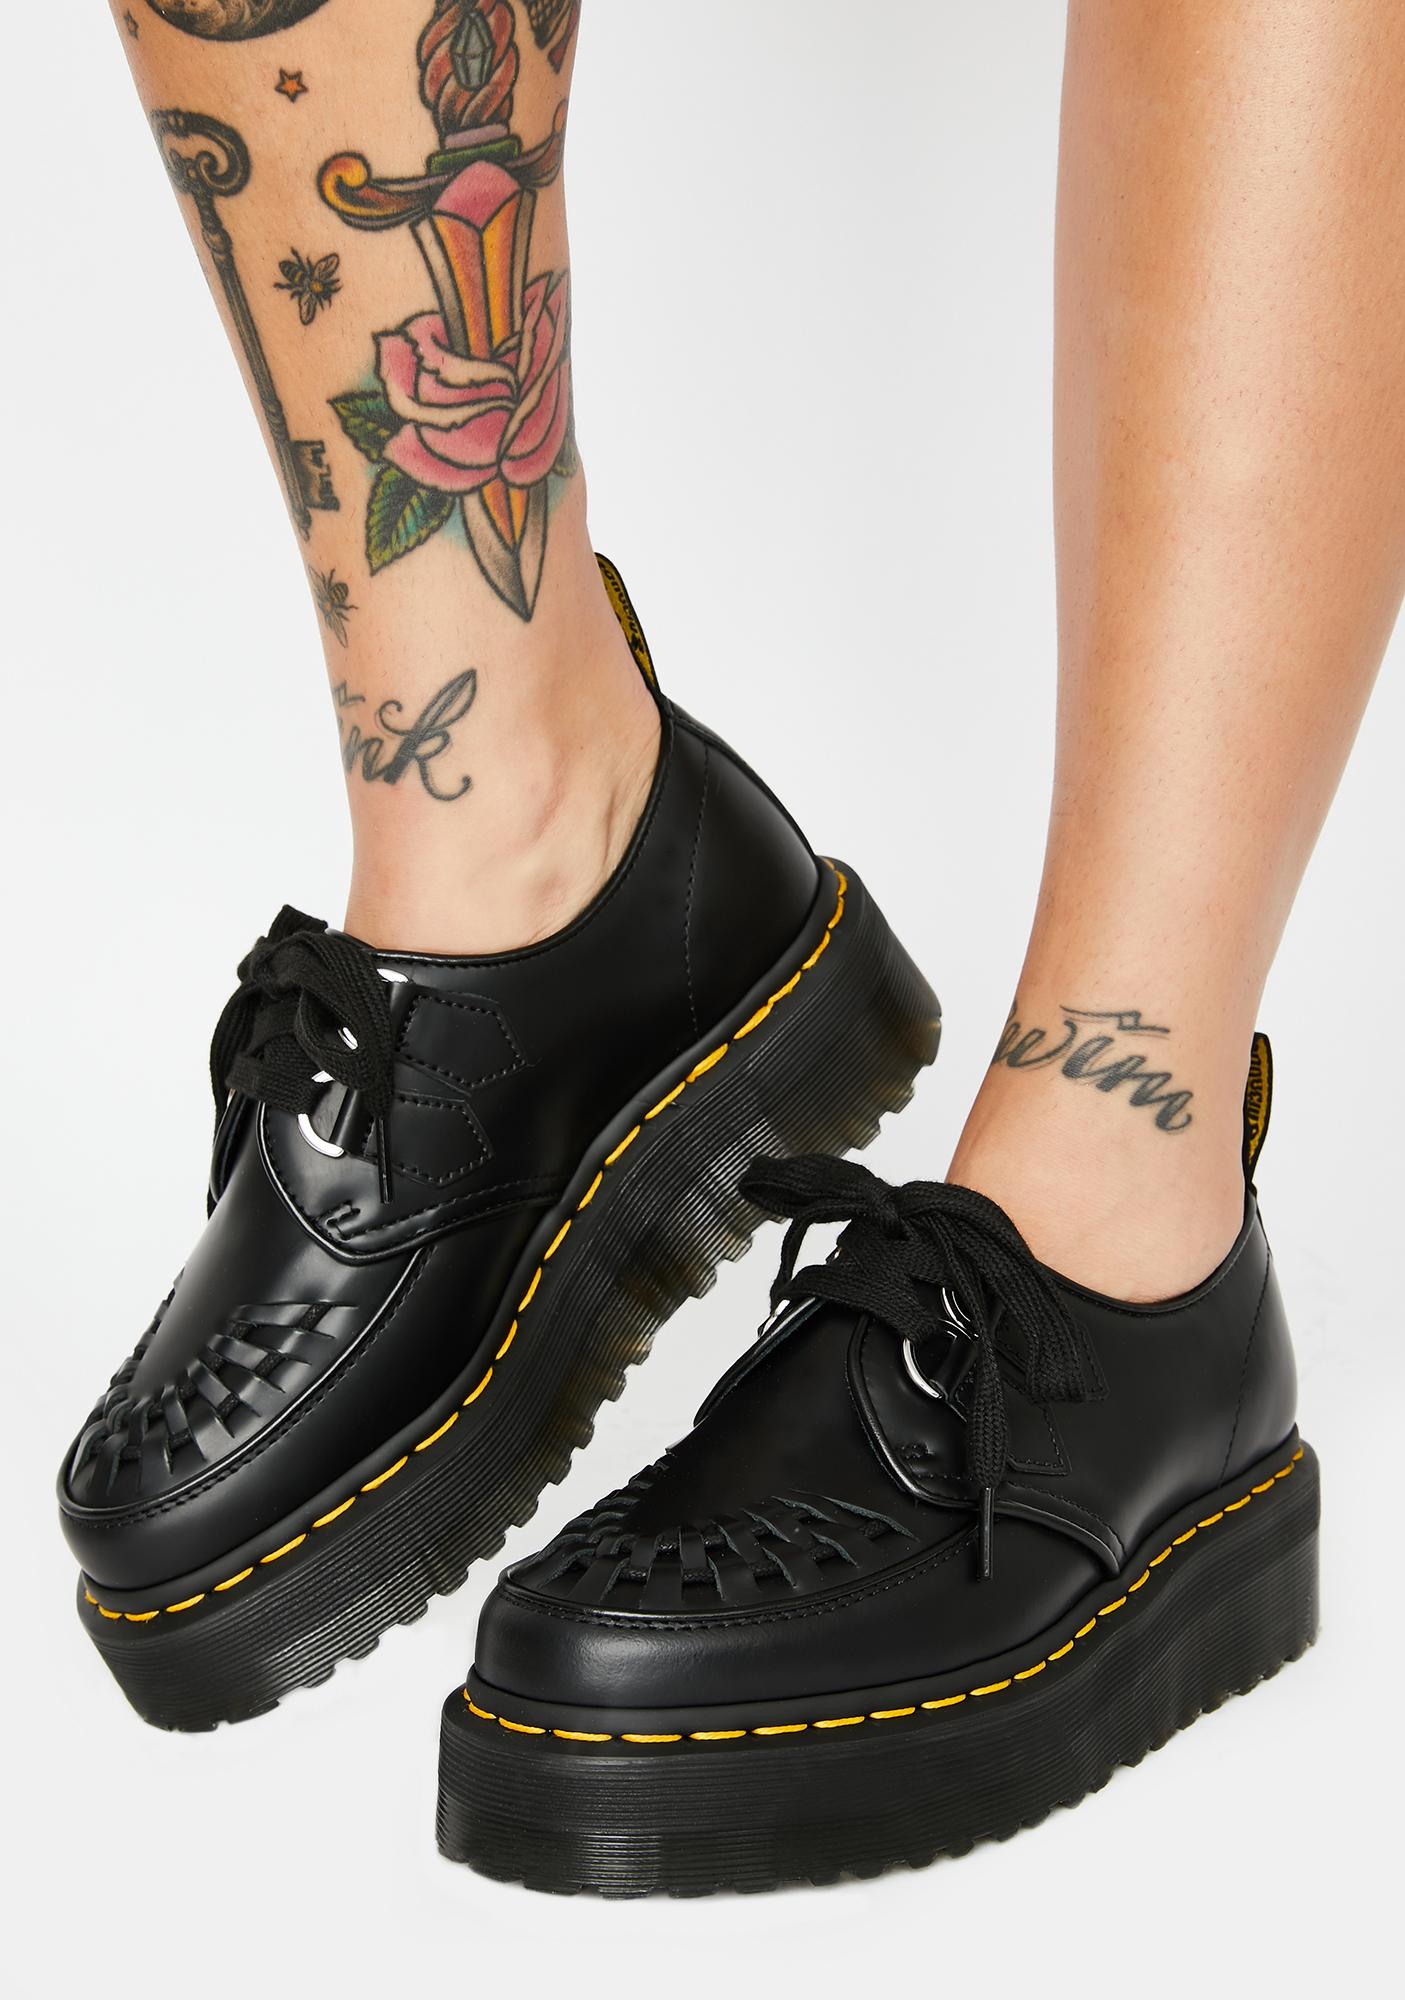 Creepers Shoes Doc Martens